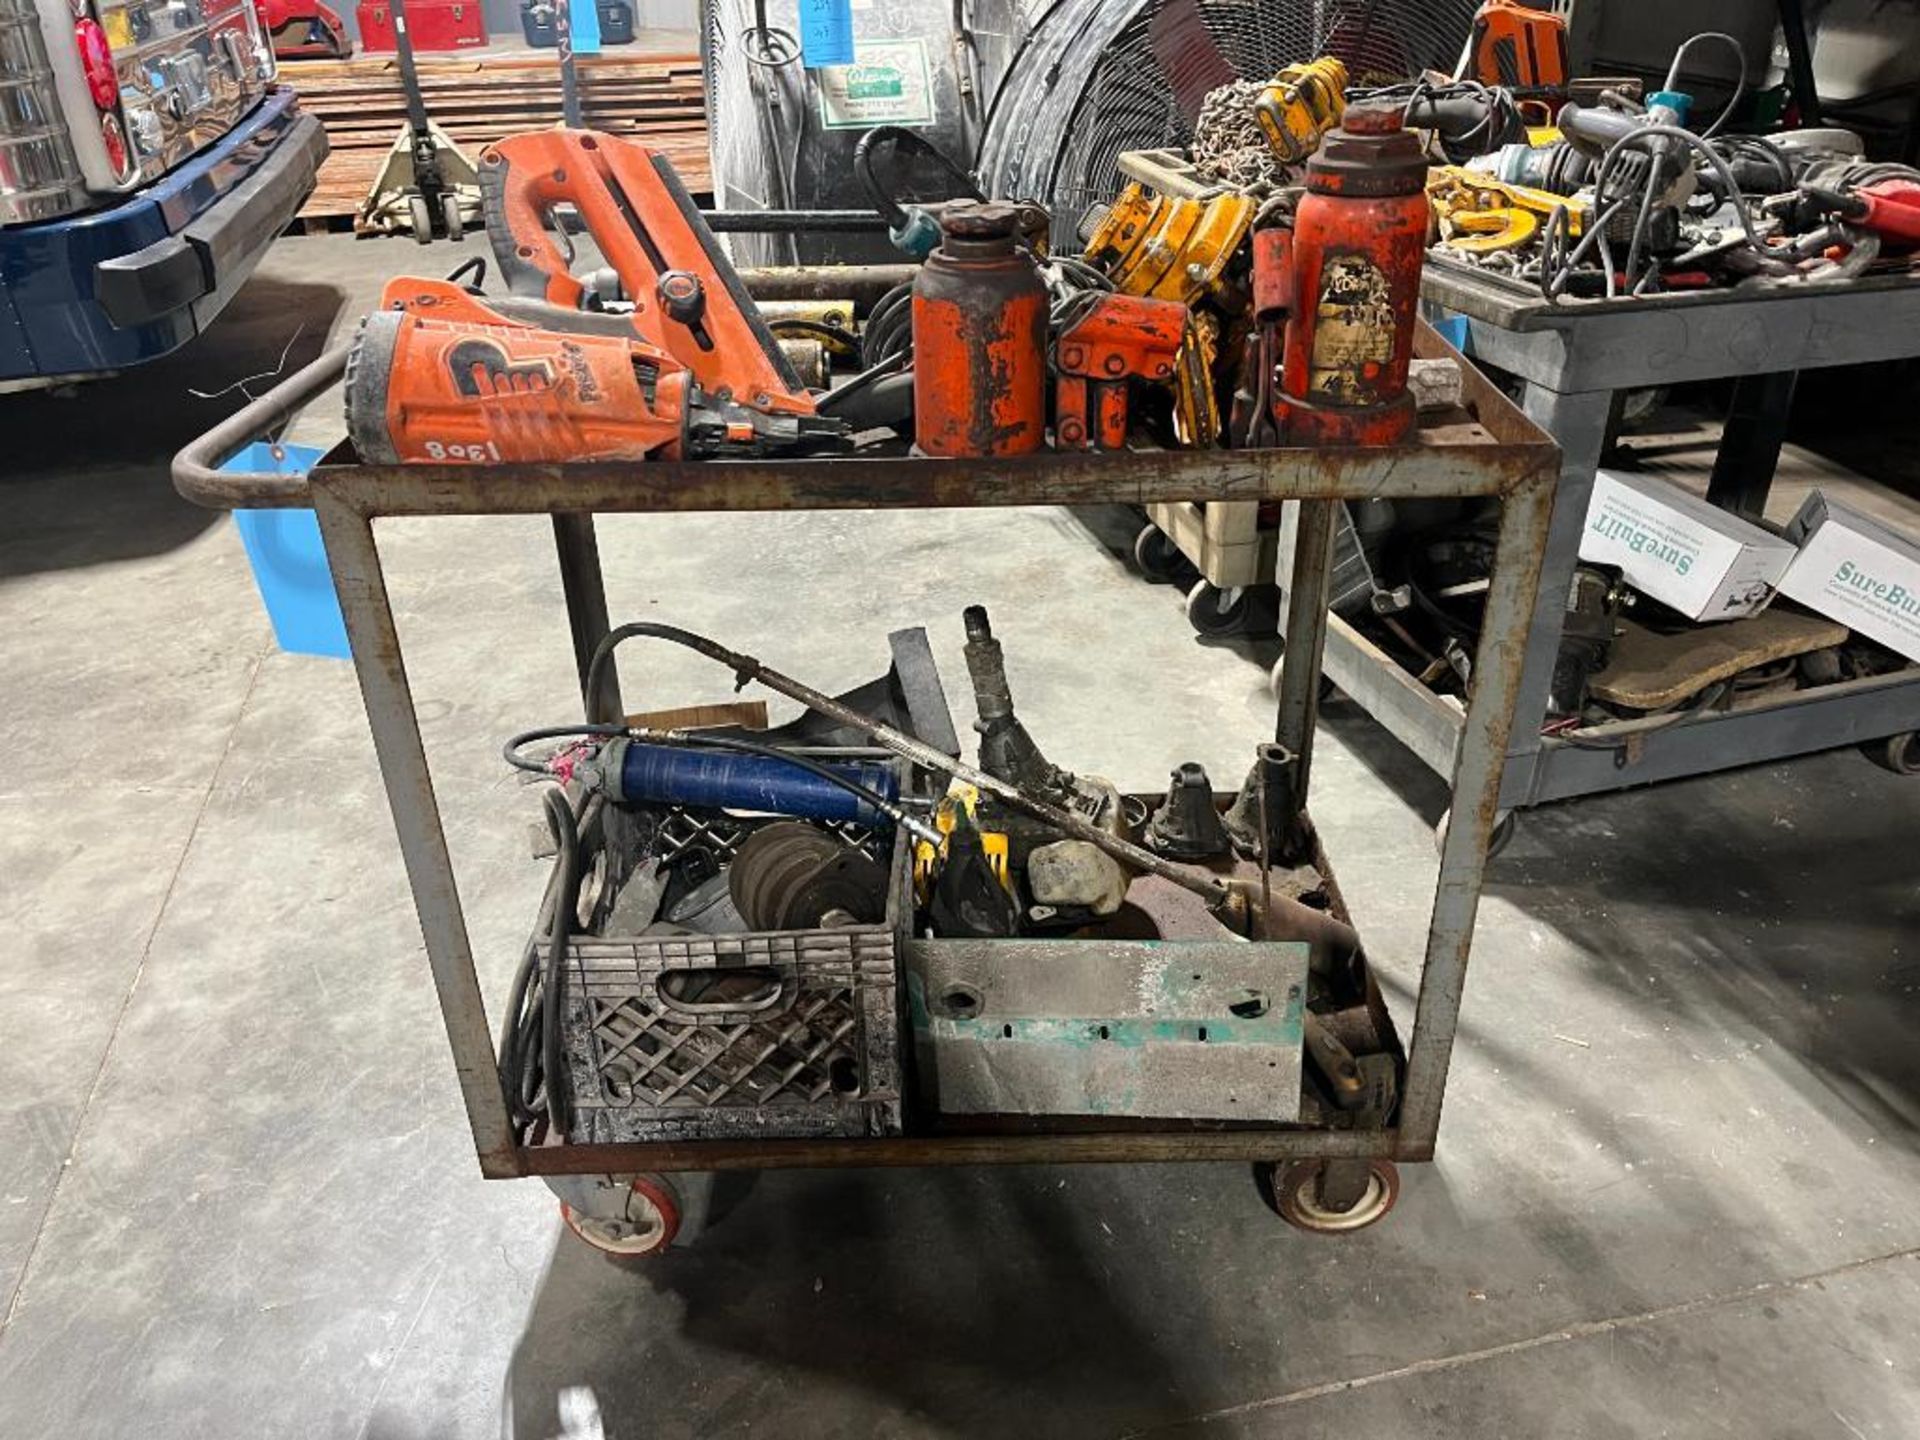 Push Cart containing assorted tools